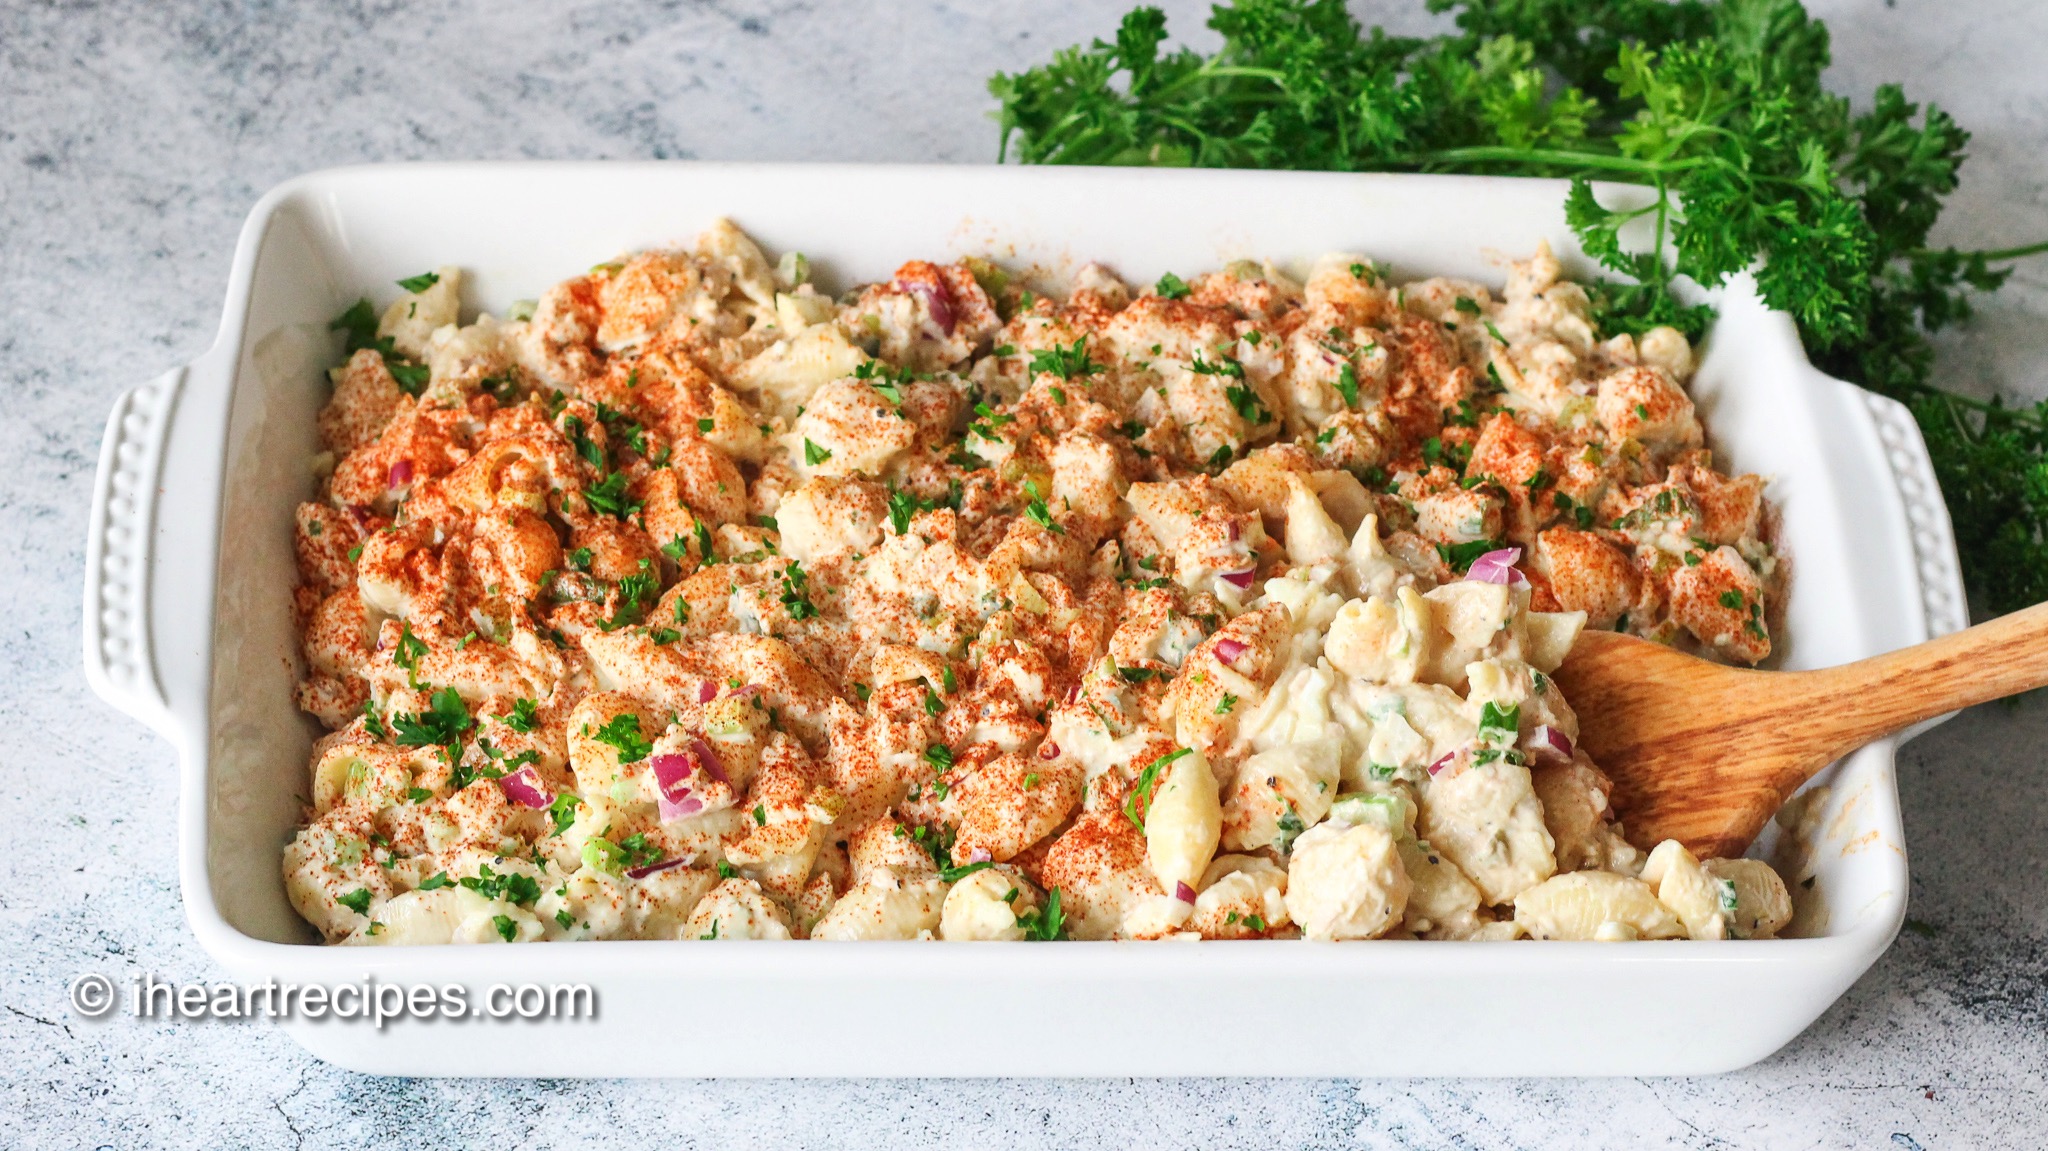 A white casserole dish filled with creamy tuna macaroni salad—a creamy pasta salad made with flaky tuna, vegetables, seasonings, and a mayonnaise dressing.